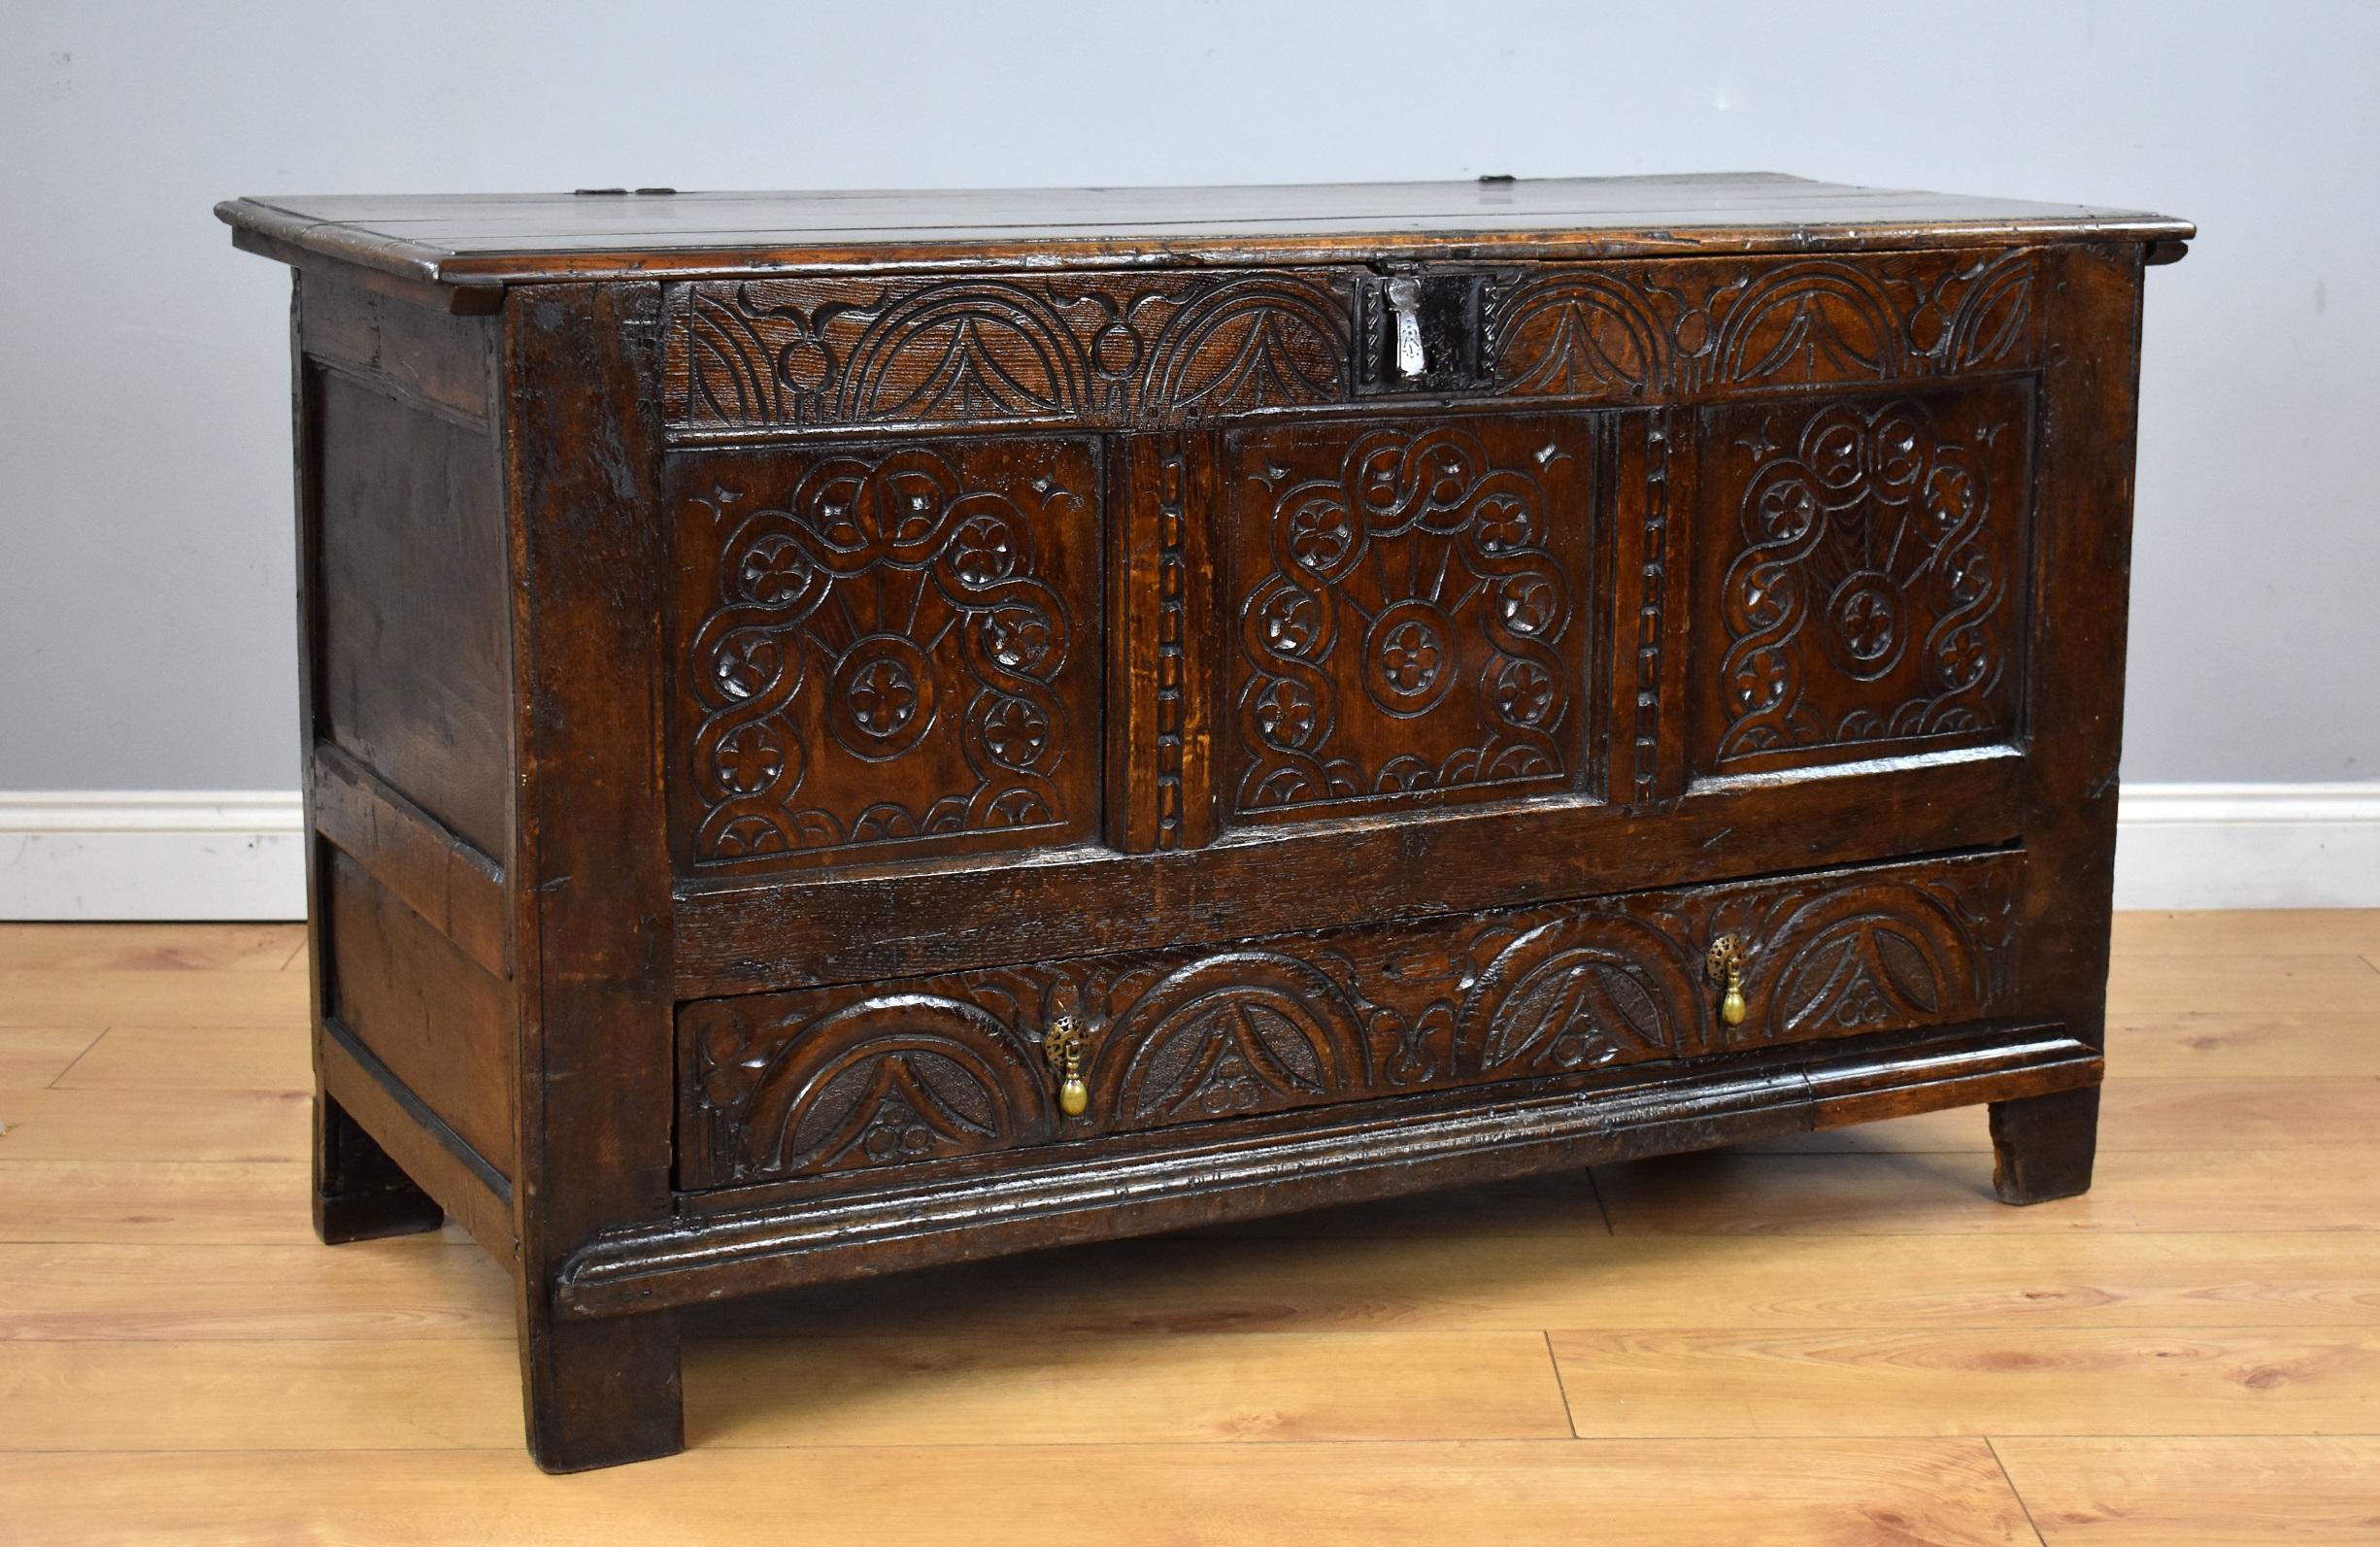 17th century English Charles II carved oak coffer in good original condition with nice carved front and drawer to the base. With original lock and hinges.